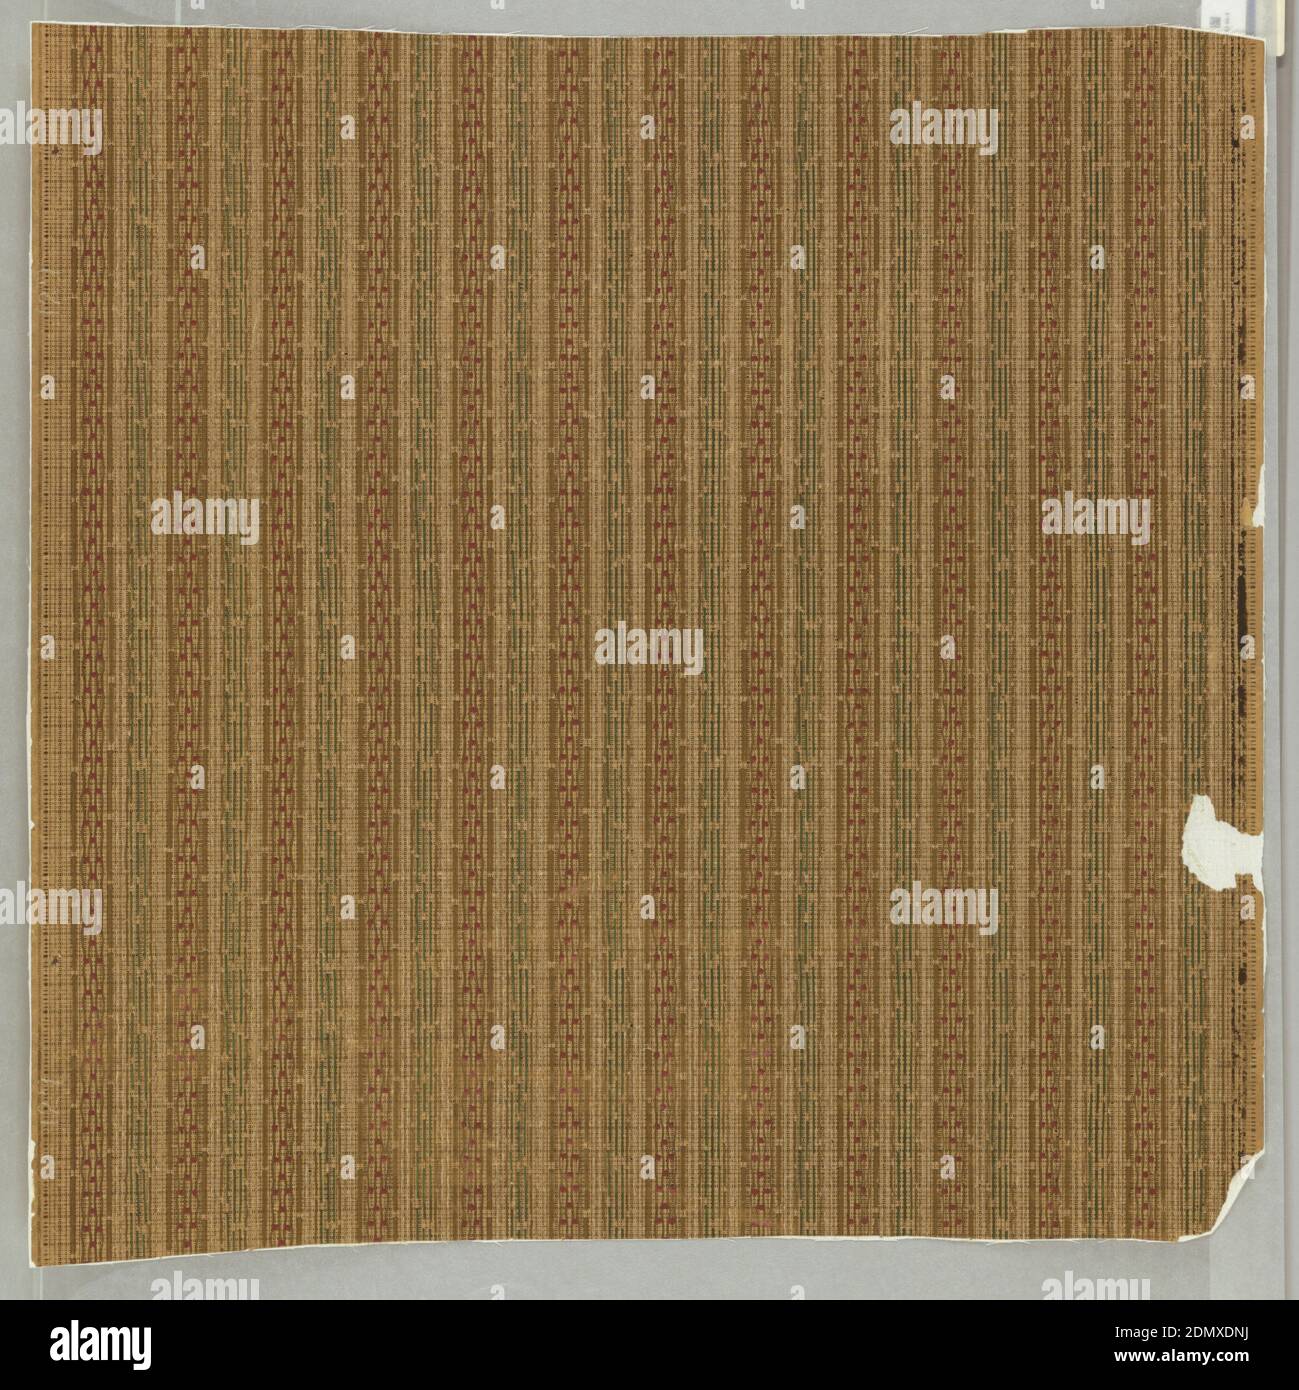 Sidewall, Machine-printed, Vertical stripes of interrupted lines in brown and green, interspersed with red dots. On brown ground, imitating textile weave., USA, 1900, Wallcoverings, Sidewall Stock Photo